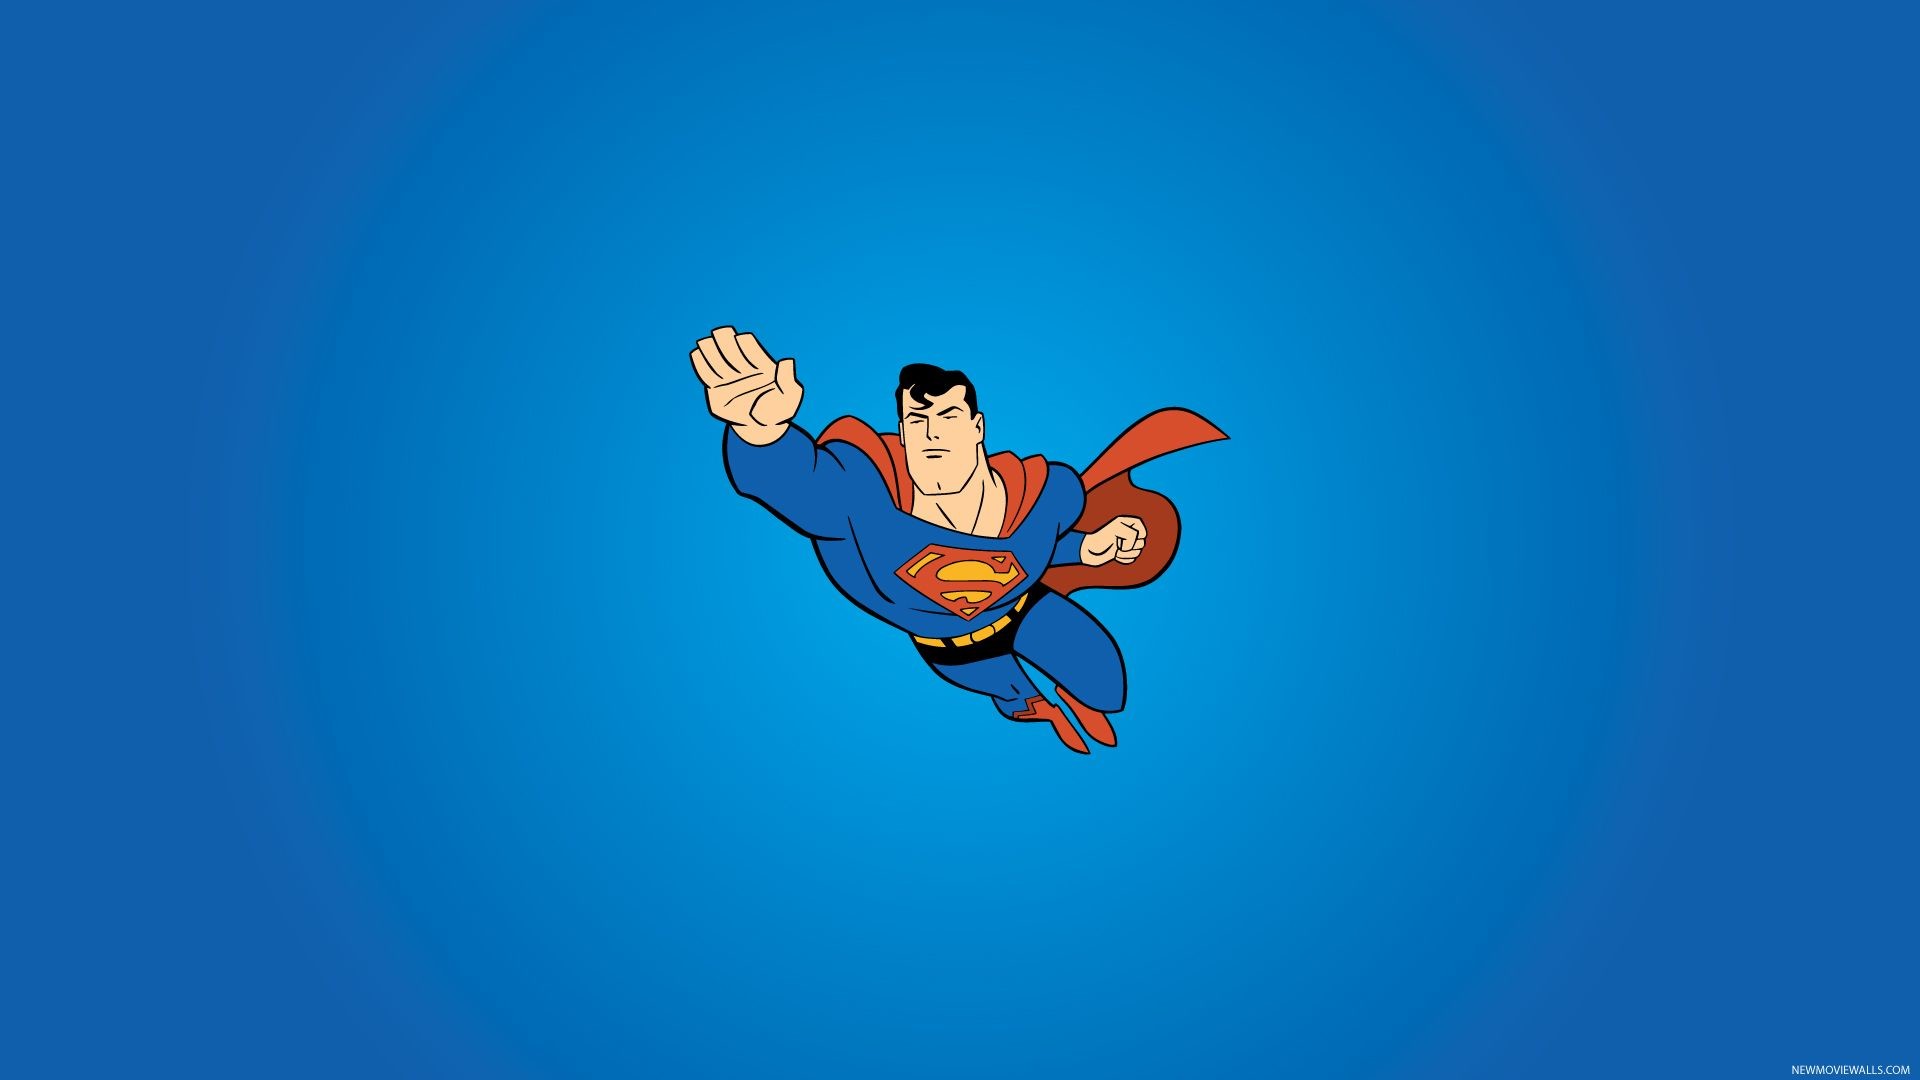 1920x1080, Pc, Laptop Superman Wallpapers, Ie Wallpapers - Desktop Wallpapers Superman - HD Wallpaper 